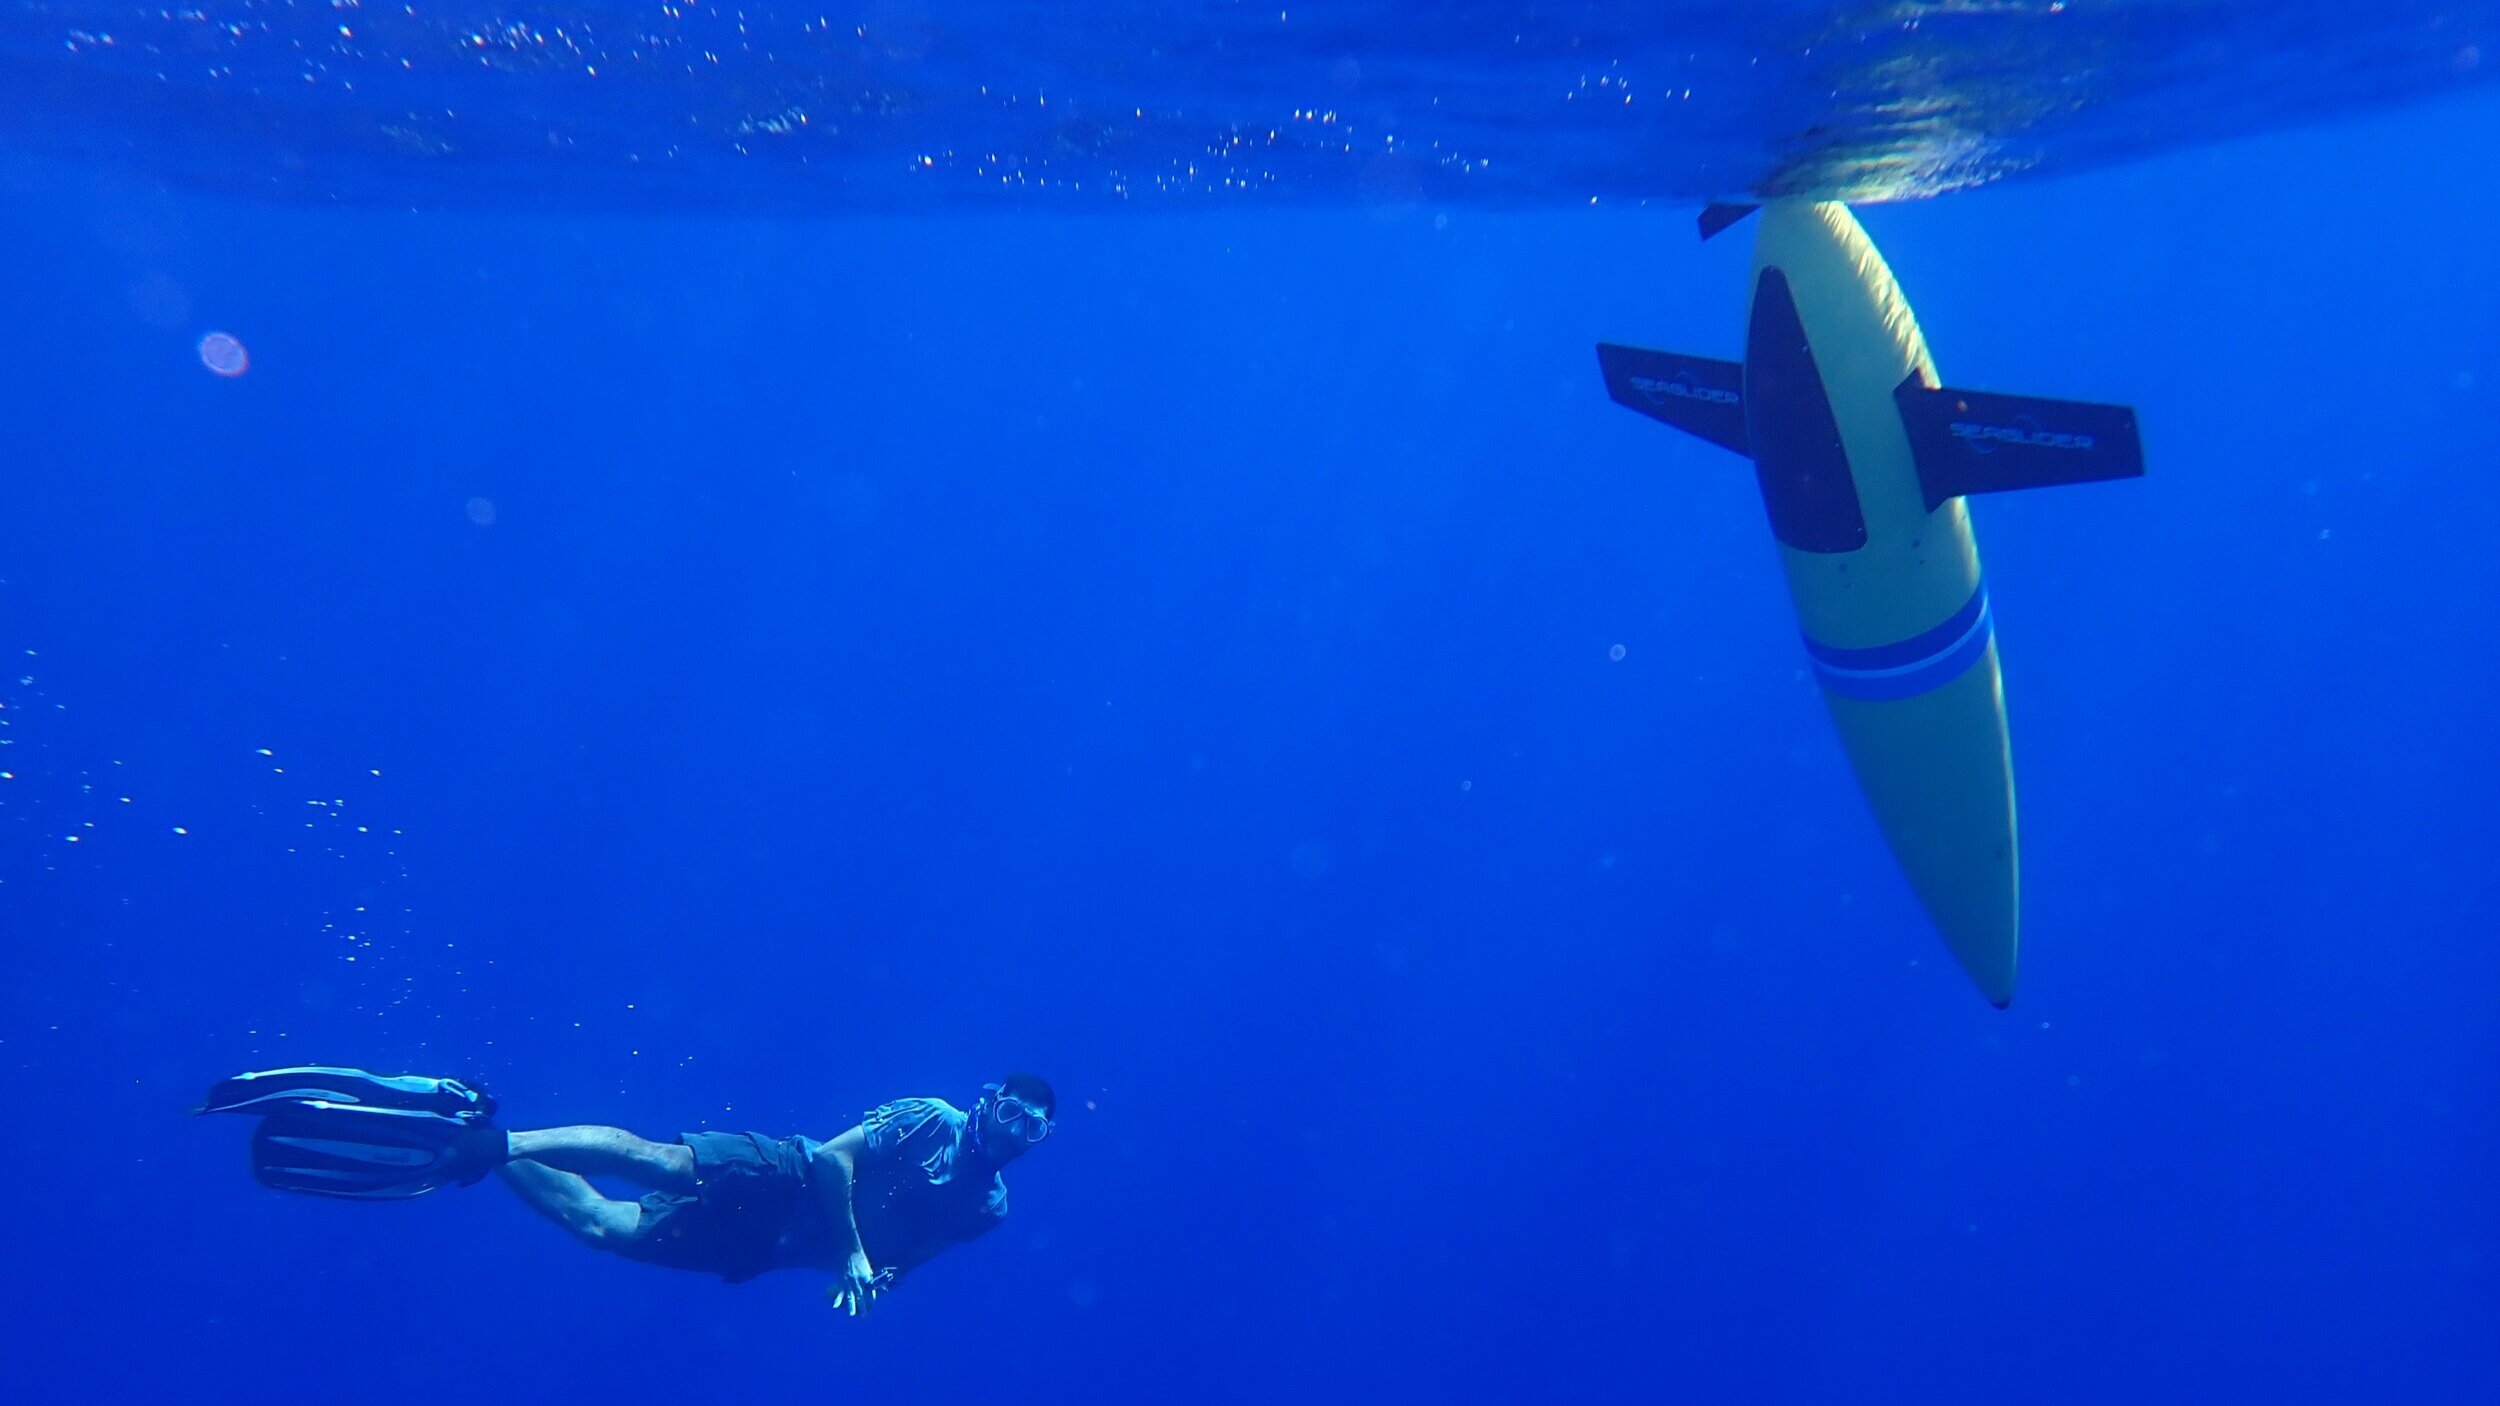 Dr. Nick Higgs of the Cape Eleuthera Institute dives alongside the glider during its launch.